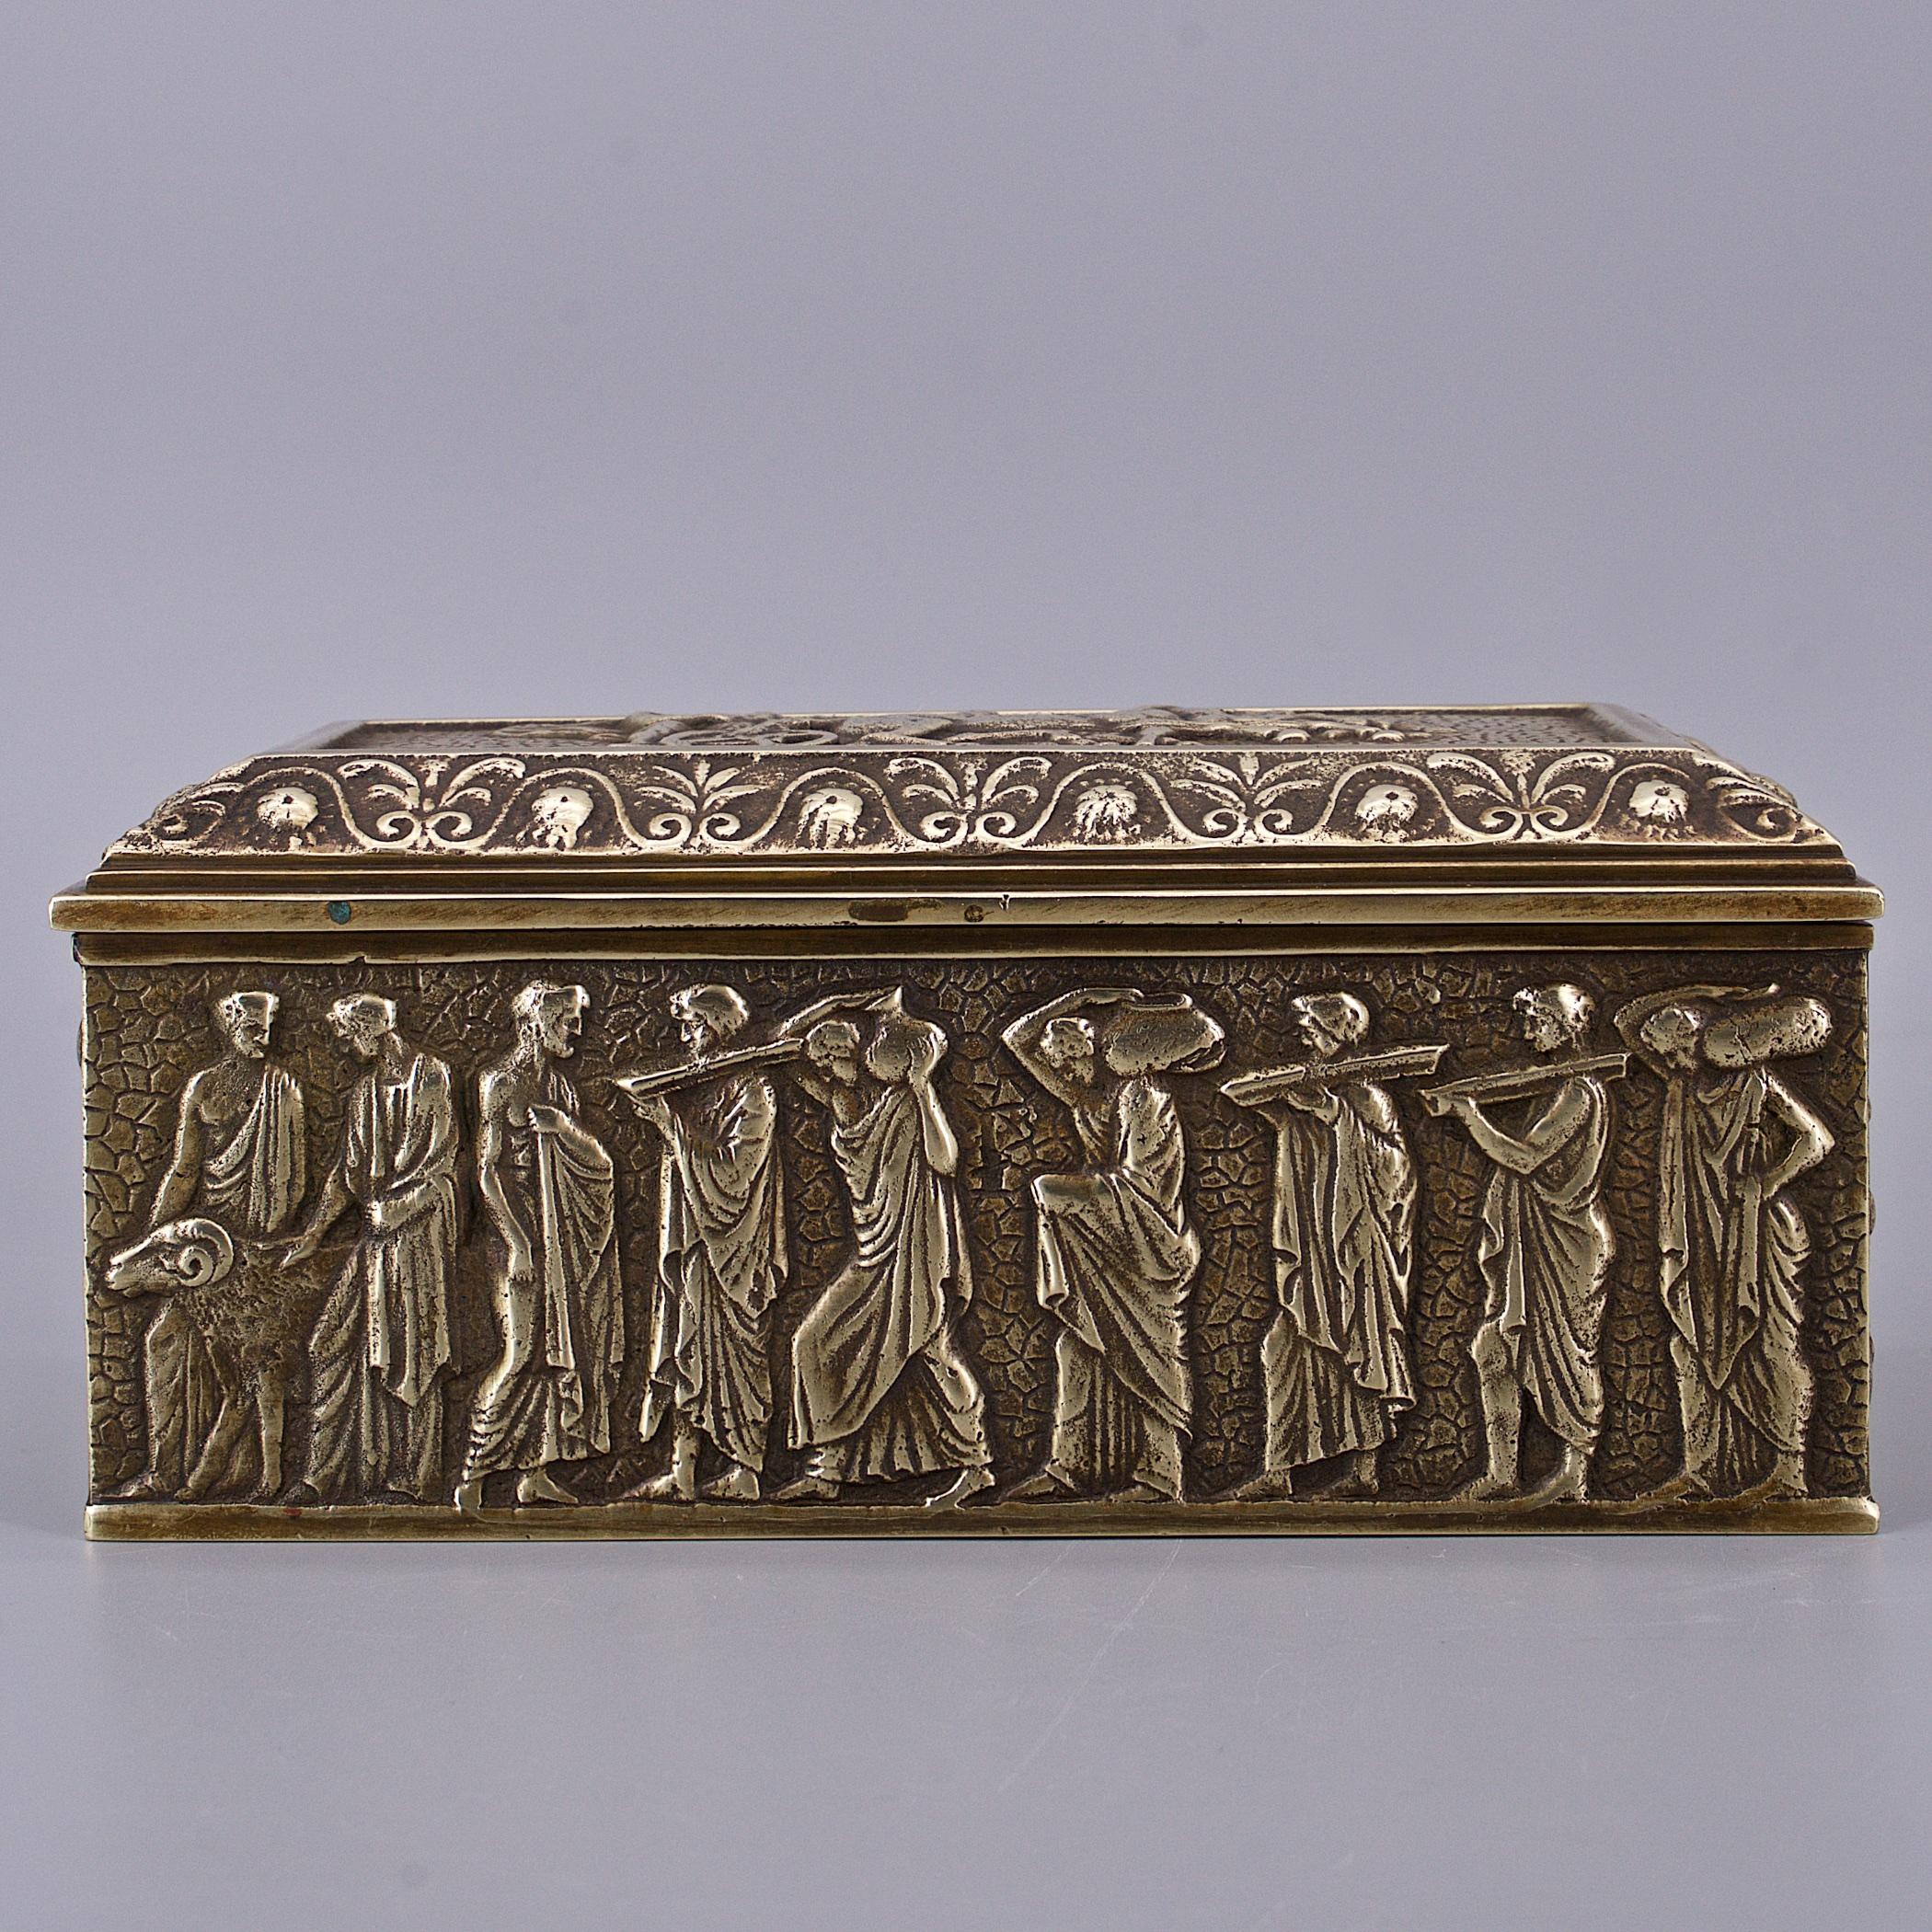 A wonderful heavy cast bronze, hinged/lidded box, lightly polished, and glowing. Depicting ancient relief scenes / characters of Ancient Roman or Greek times. No makers markings were found on the box.